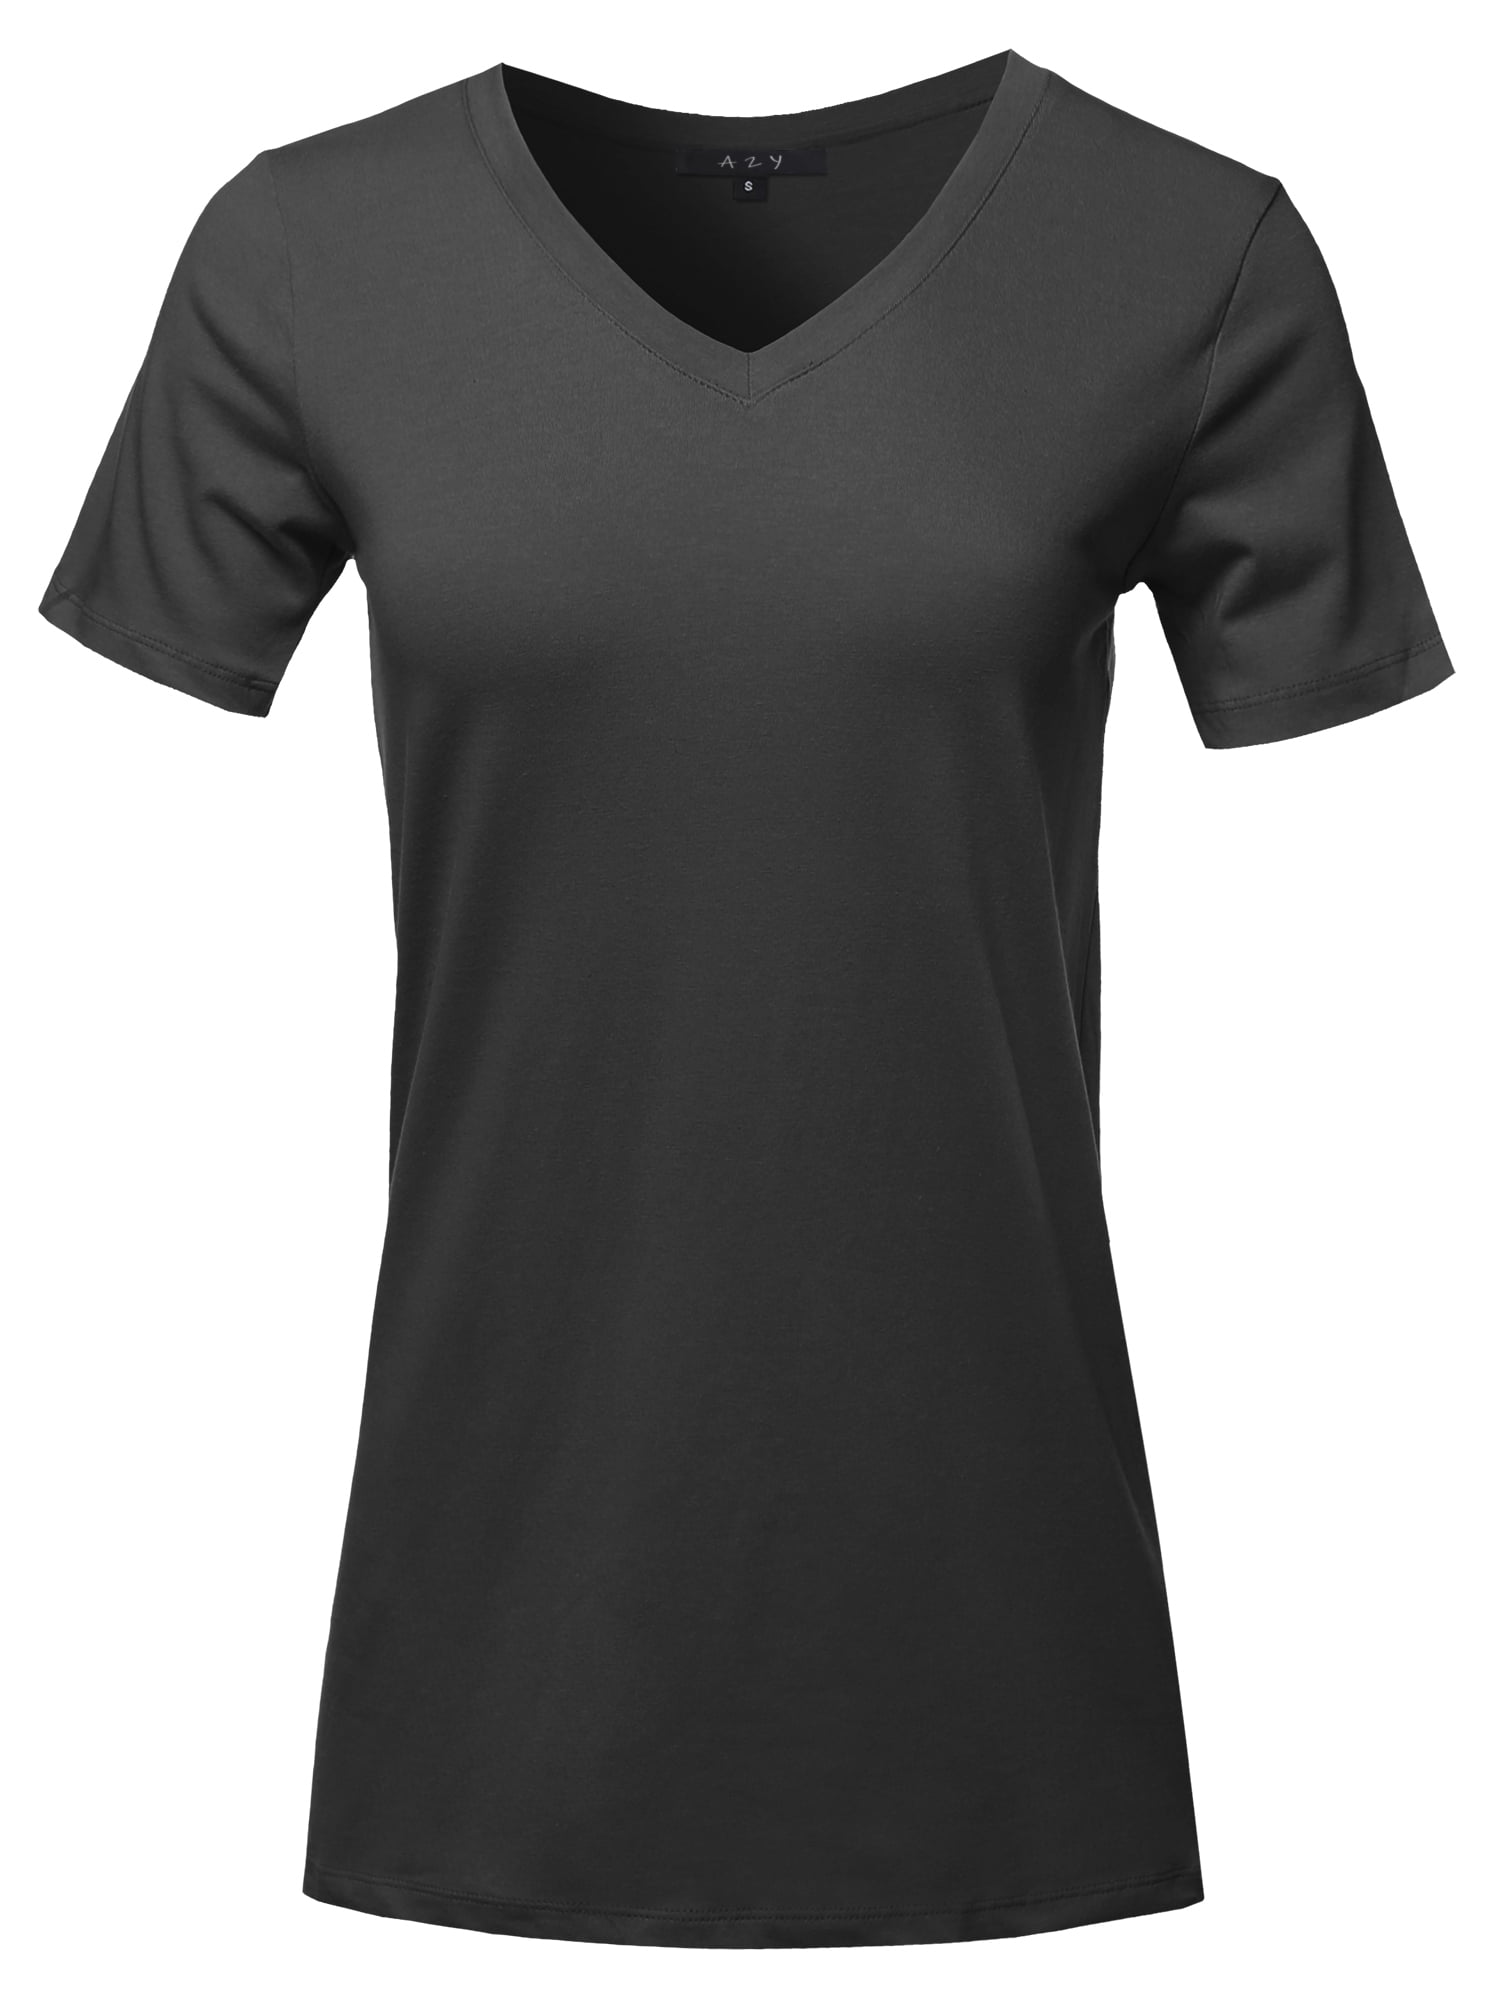 A2Y Women's Basic Solid Premium Cotton Short Sleeve V-neck T Shirt Tee ...